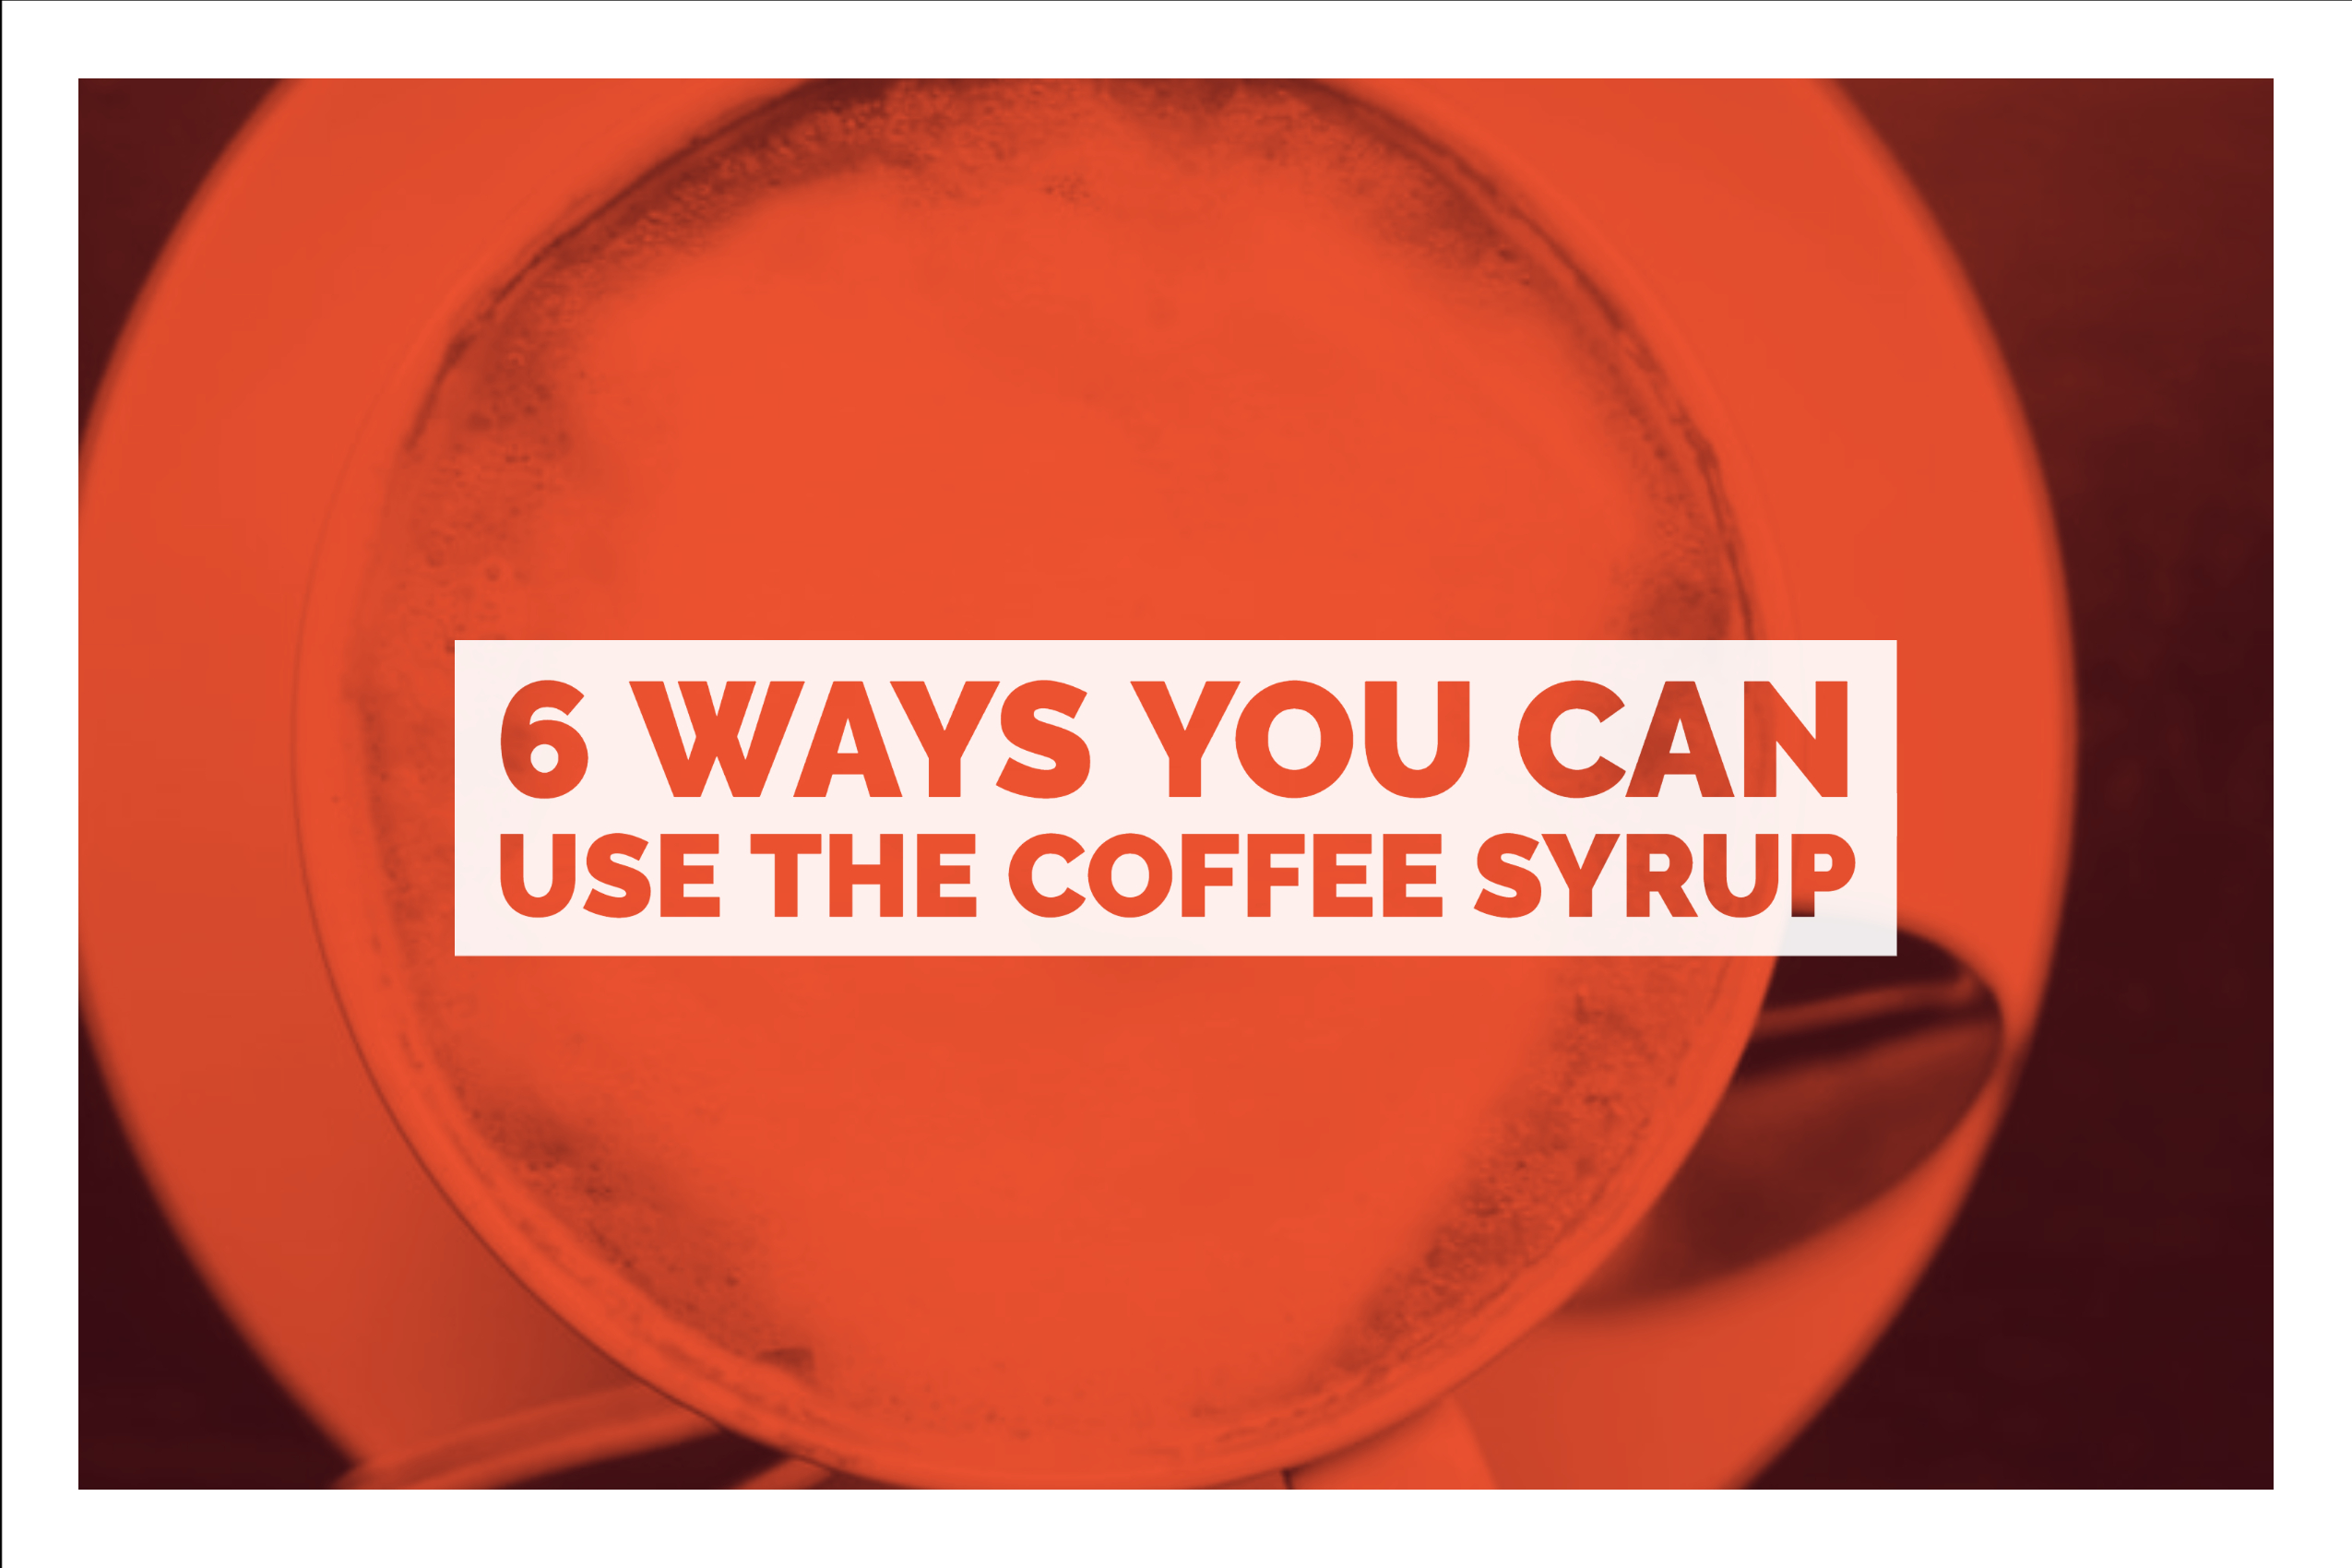 6 Ways You Can Use The Coffee Syrup